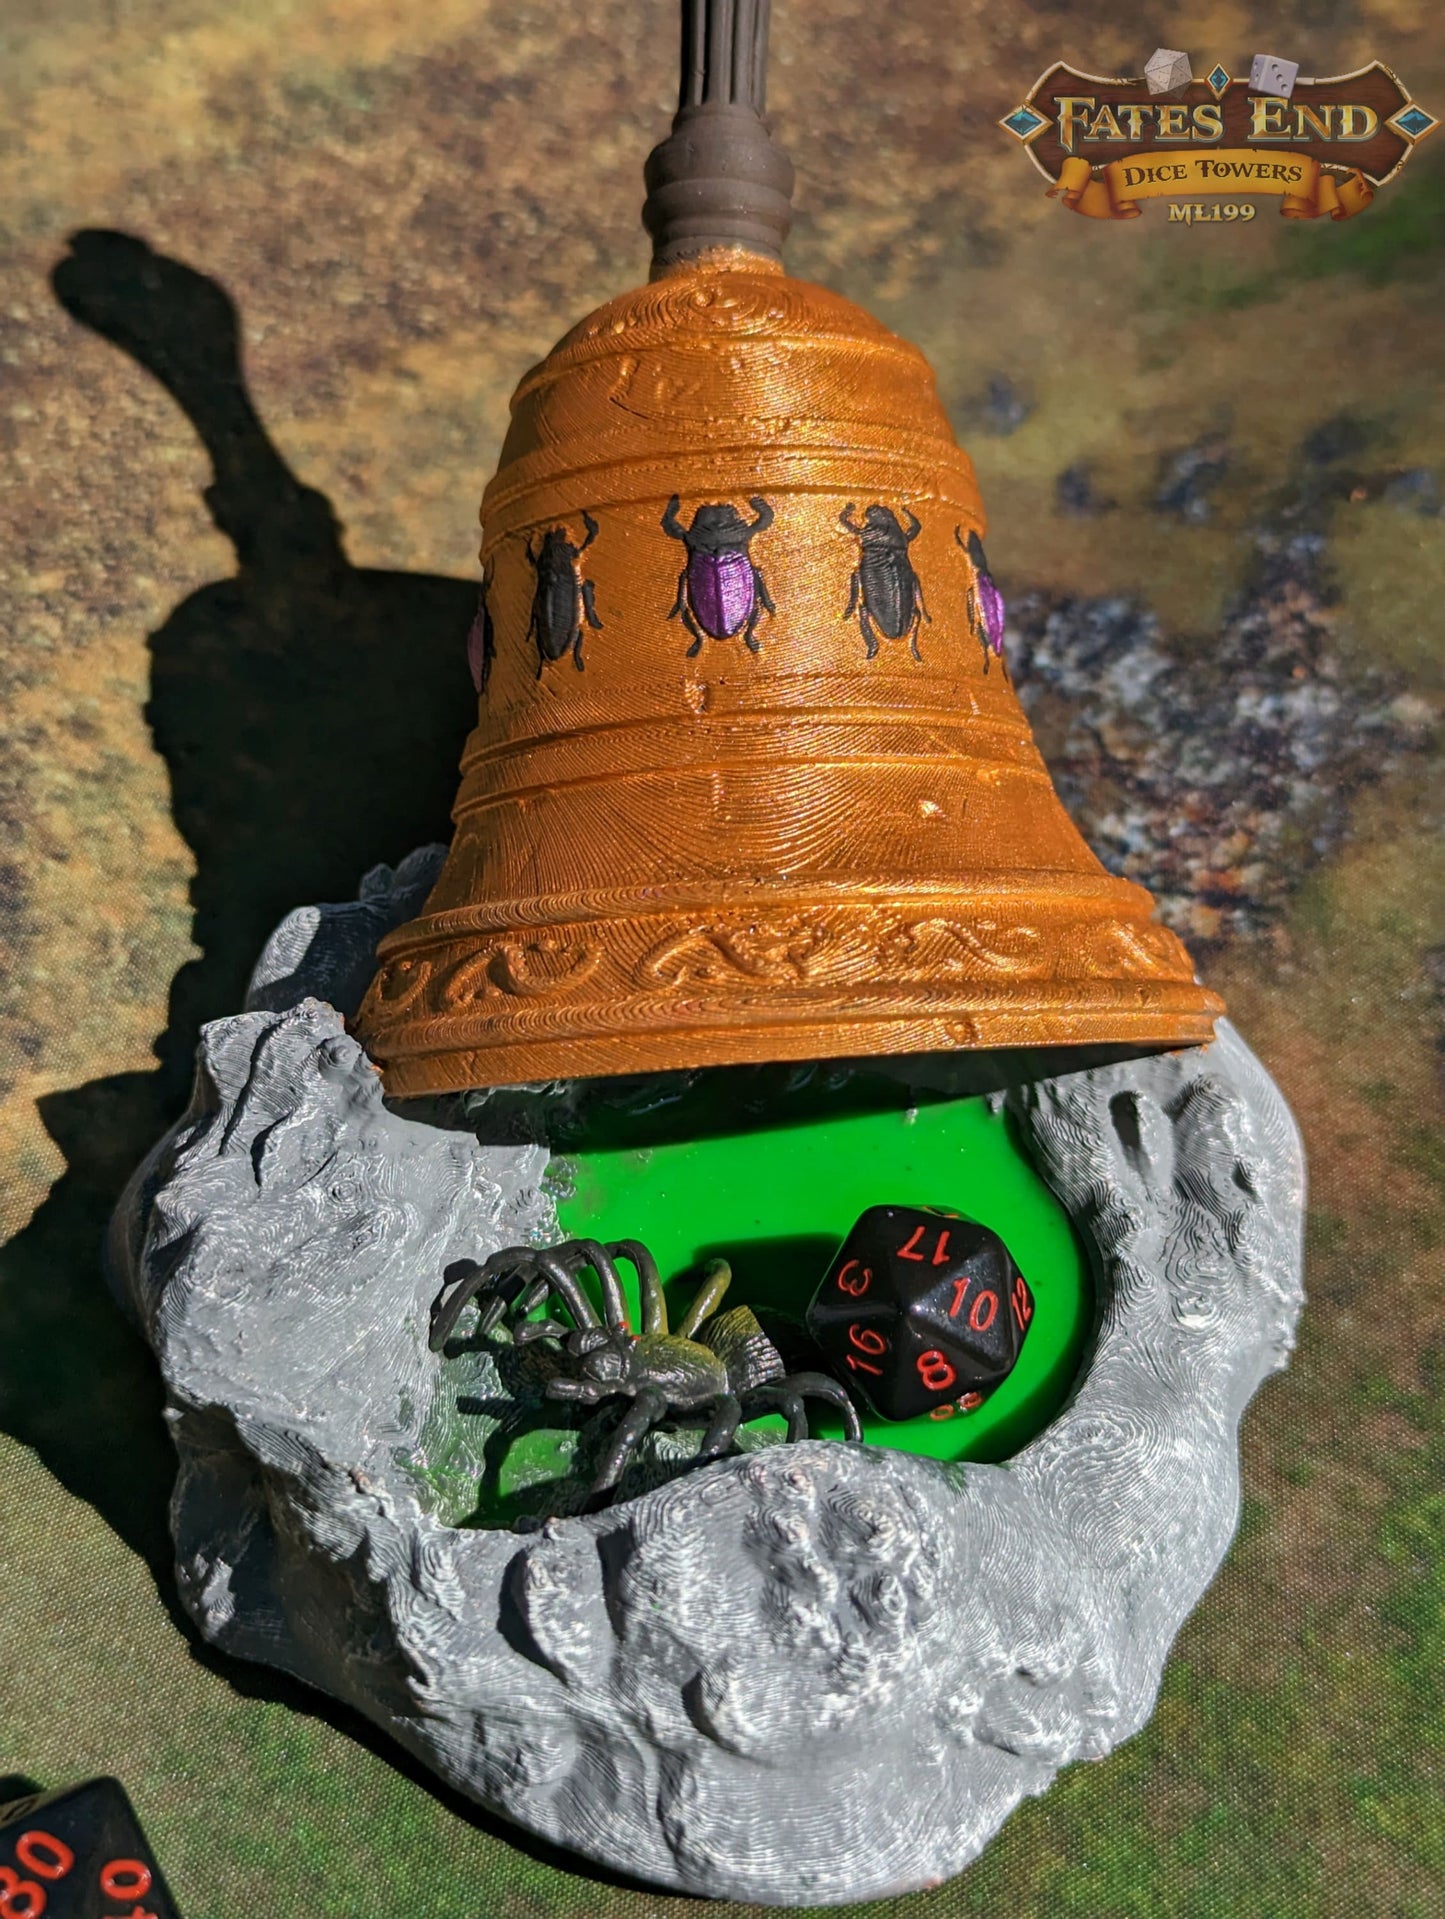 Bell of Bugs Dice Tower - Fate's End Collection - Summon Nature's Melodies and Mysteries with Every Ring.